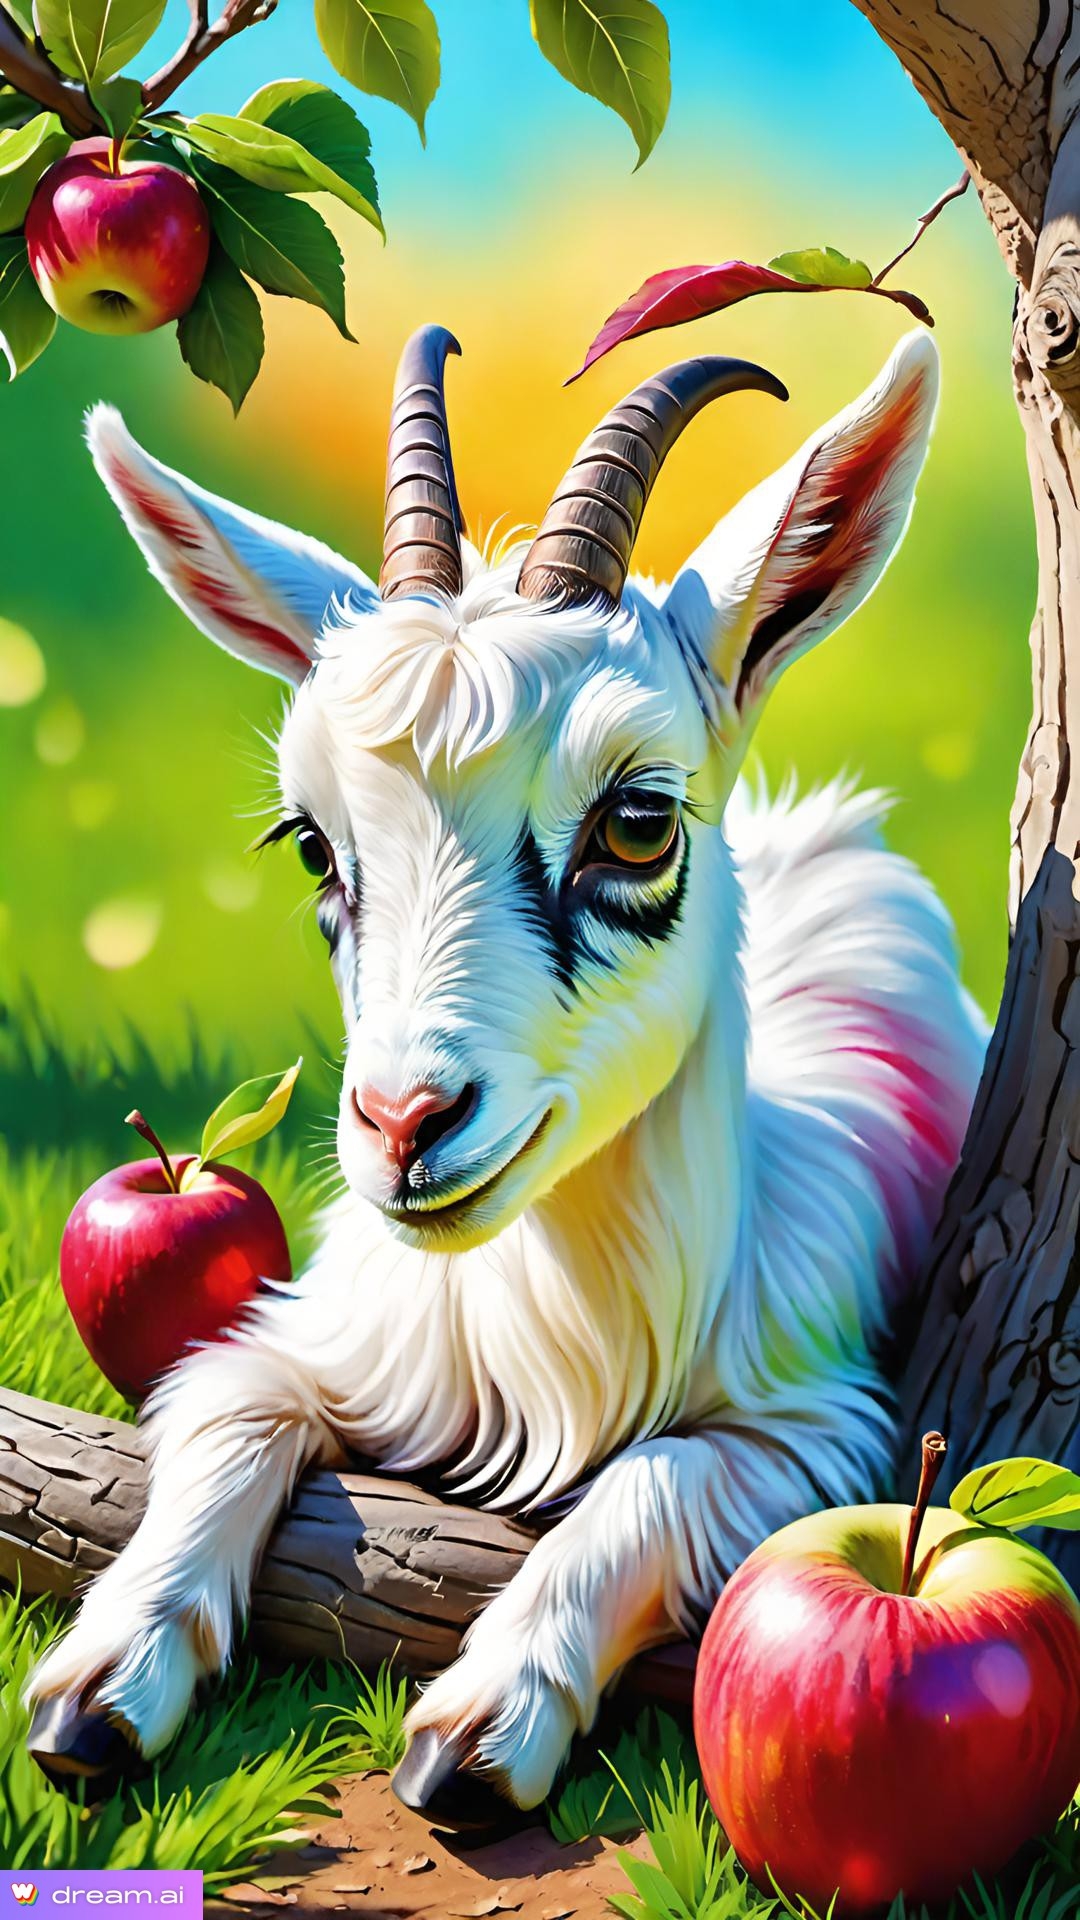 a white goat with horns lying on a tree branch with an apple